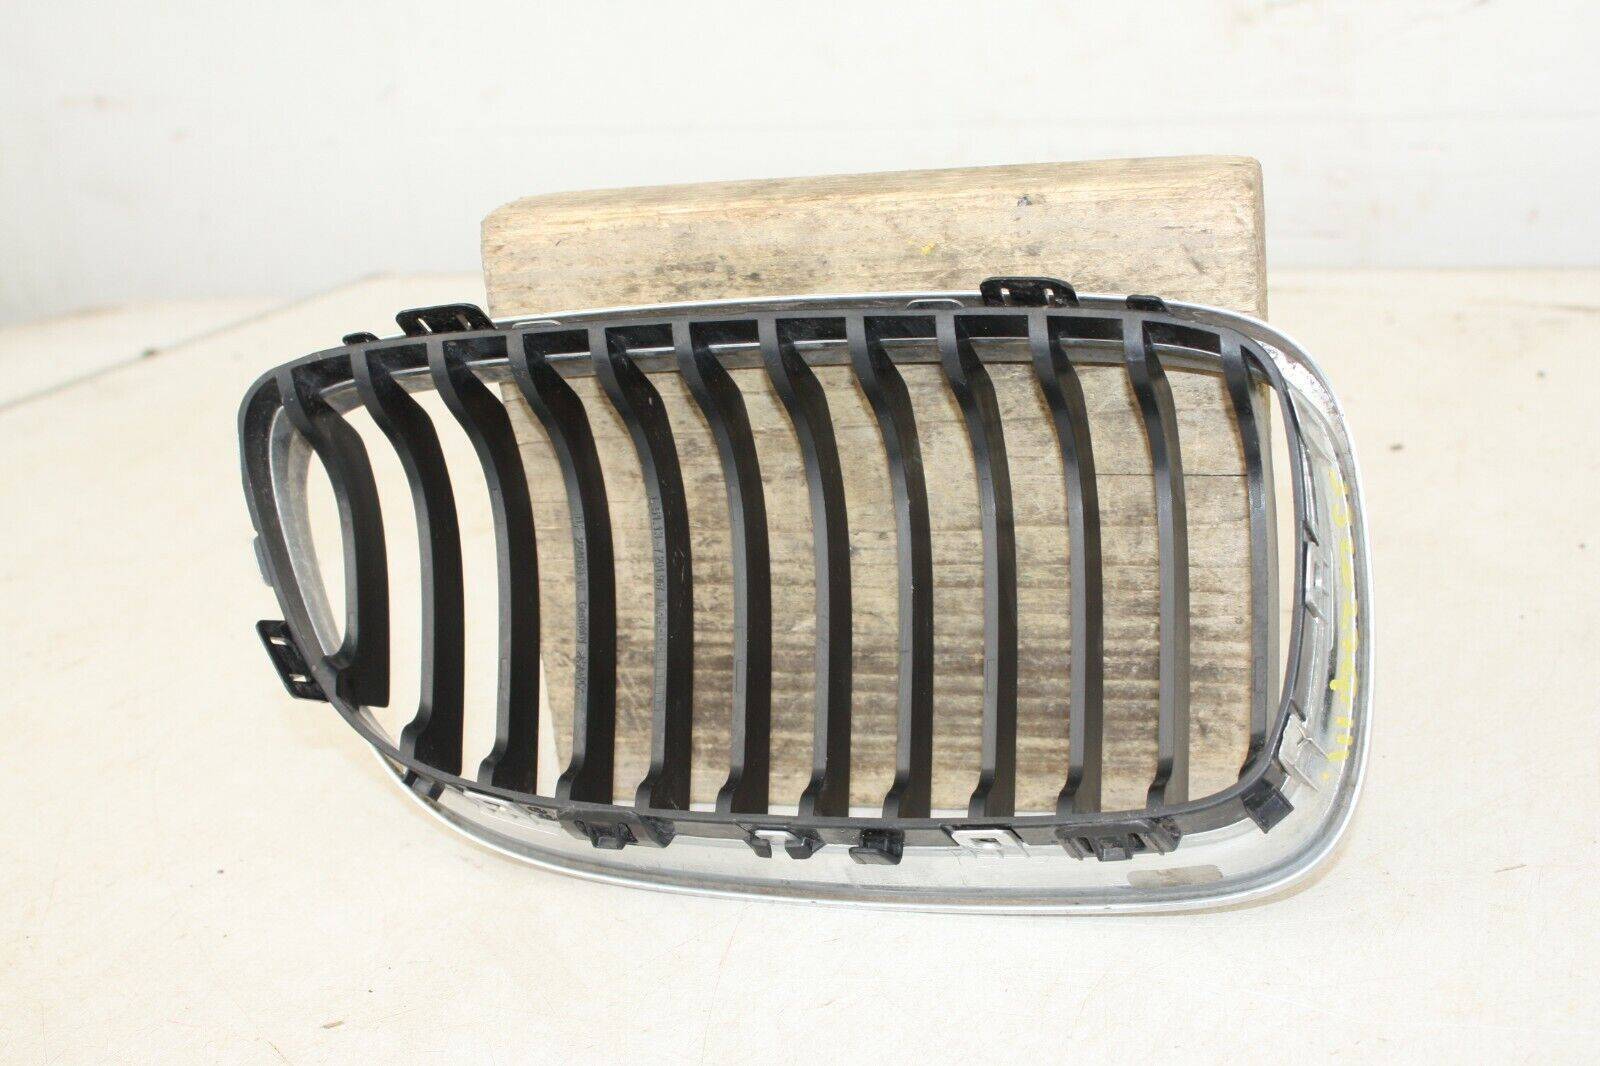 BMW-3-SERIES-FRONT-BUMPER-KIDNEY-GRILL-LEFT-2008-TO-2012-175367532000-9